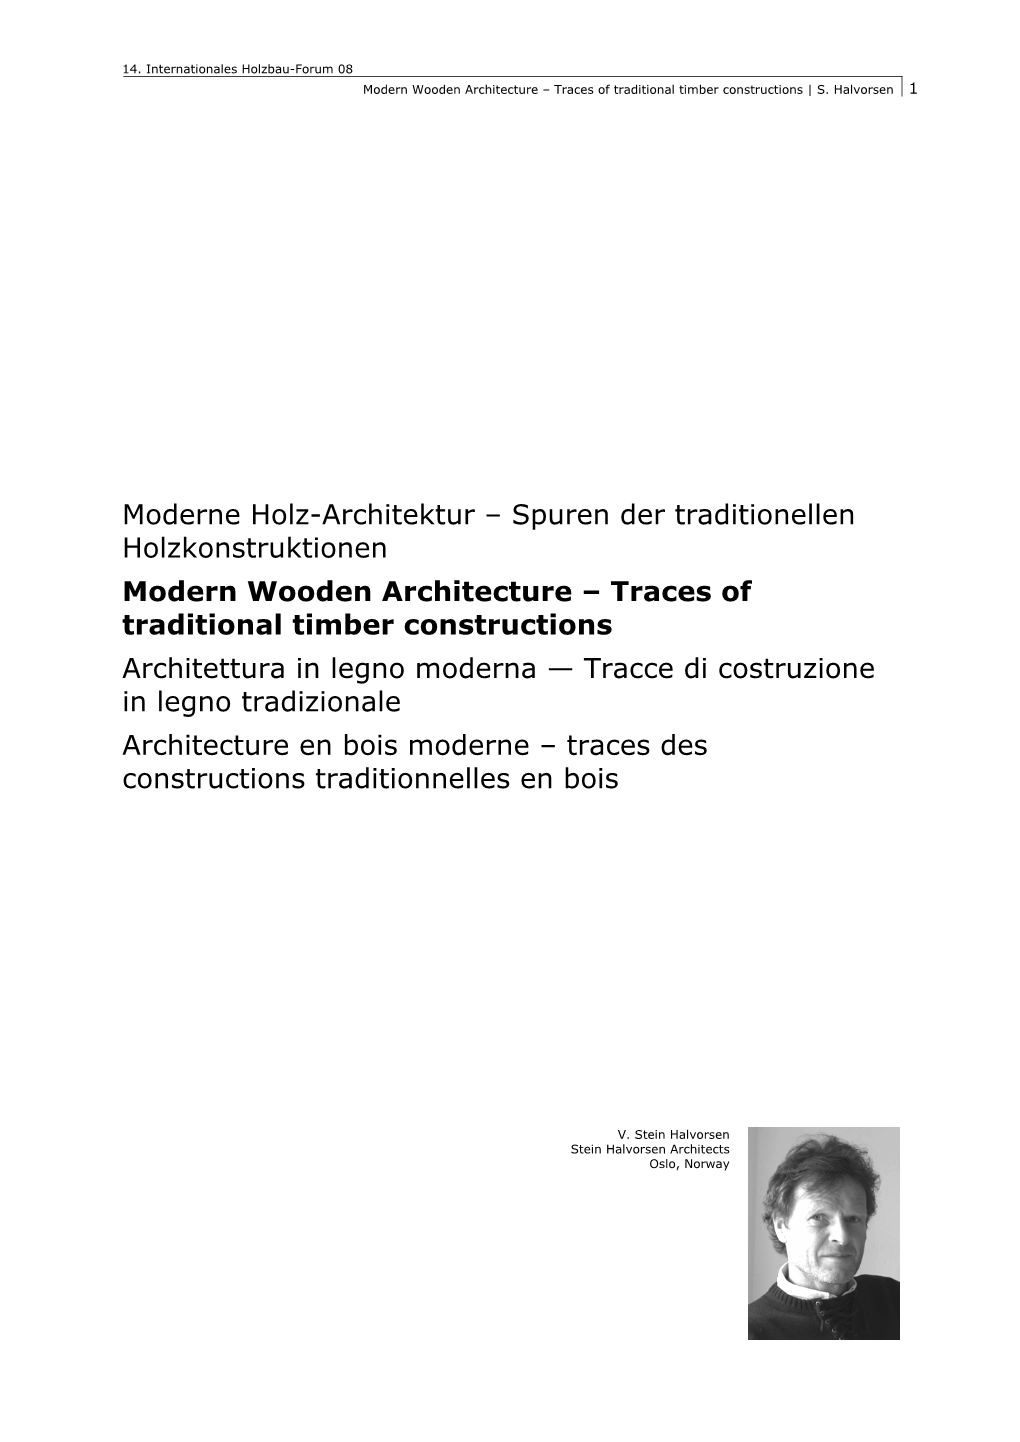 Modern Wooden Architecture – Traces of Traditional Timber Constructions | S